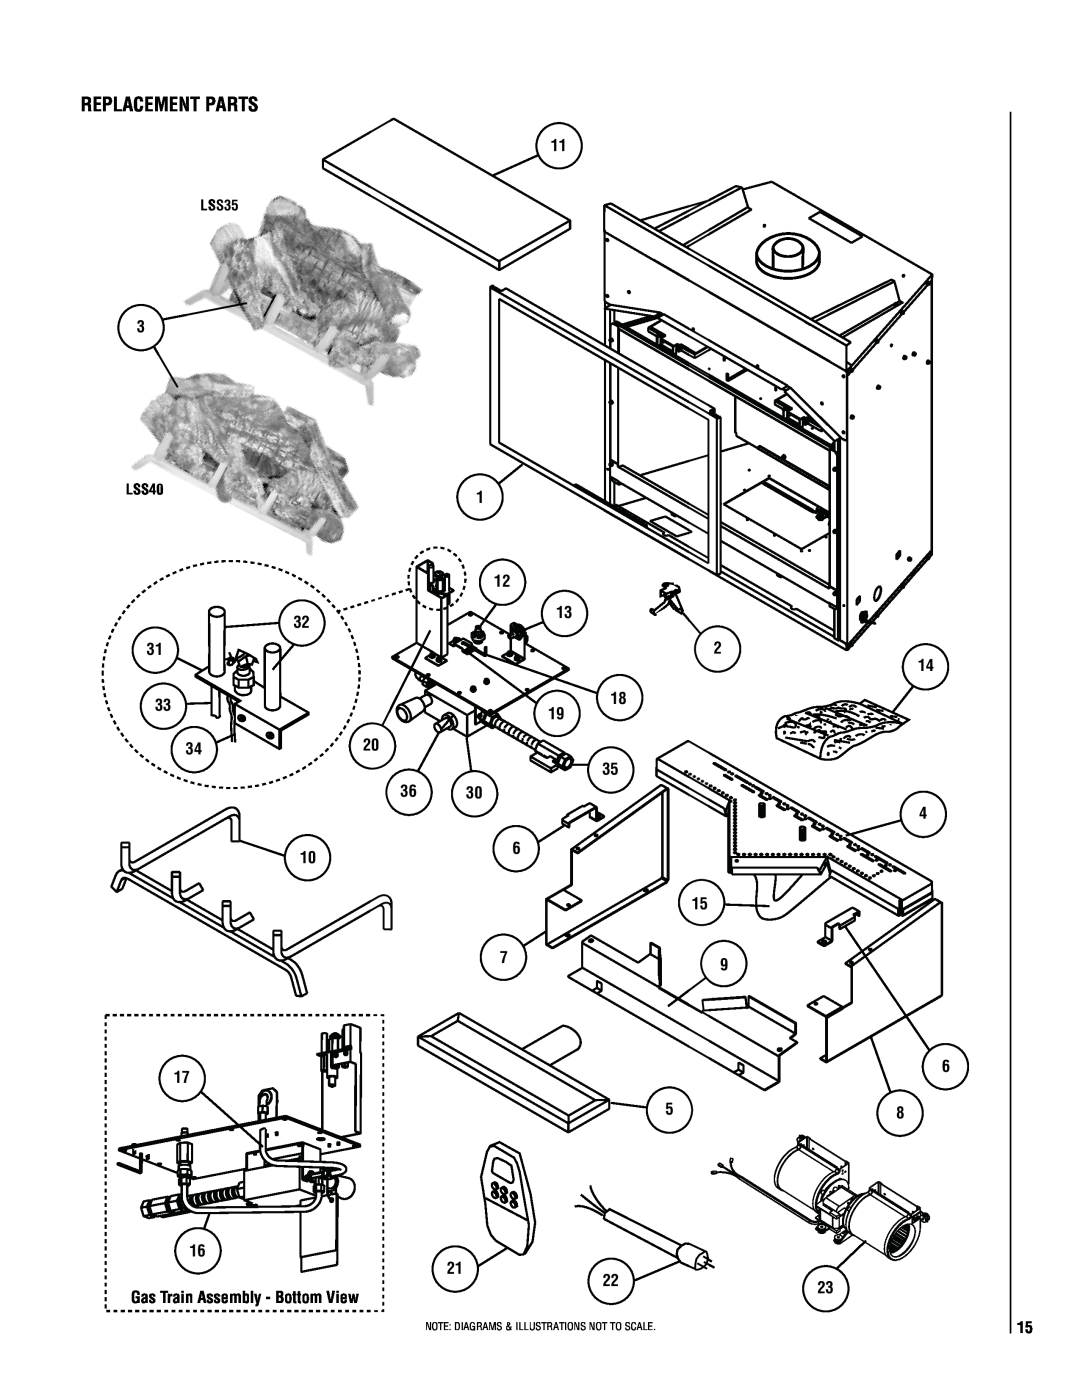 Magnavox LSS-40CP manual Replacement Parts, 32 31 33, 1 12 13 2 14 18 19 35, LSS35, LSS40 